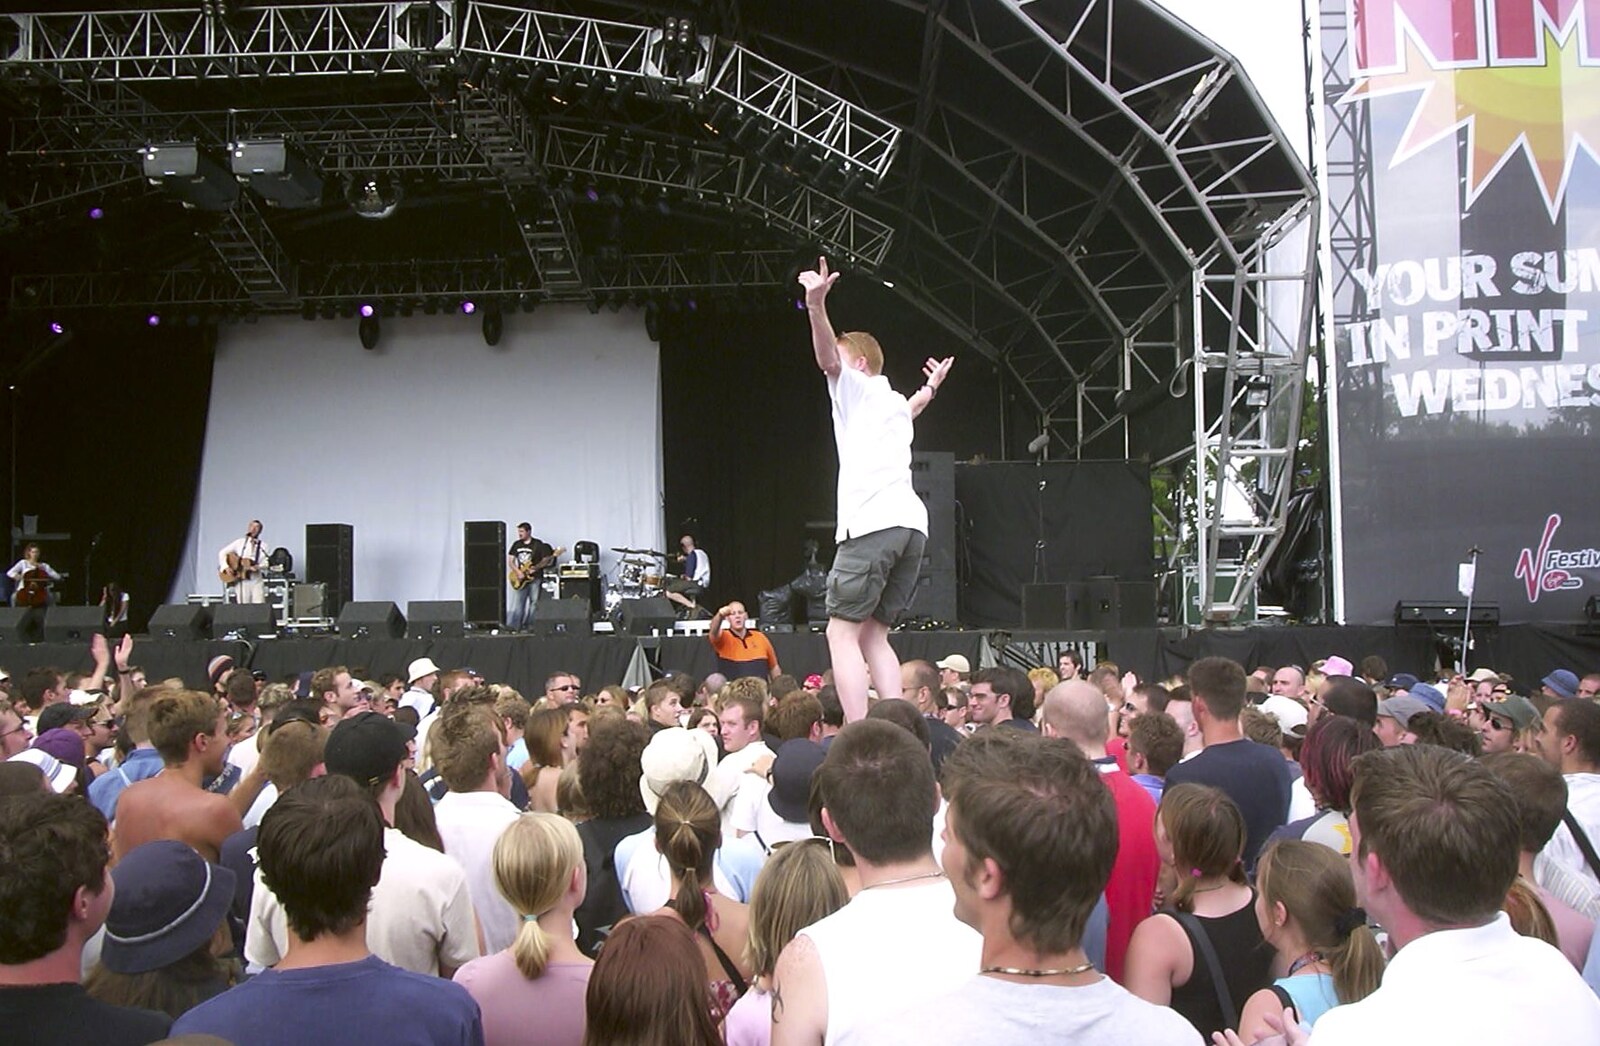 Someone's in mid-air for Damian Rice from V Festival 2003, Hyland's Park, Chelmsford, Essex - 16th August 2003